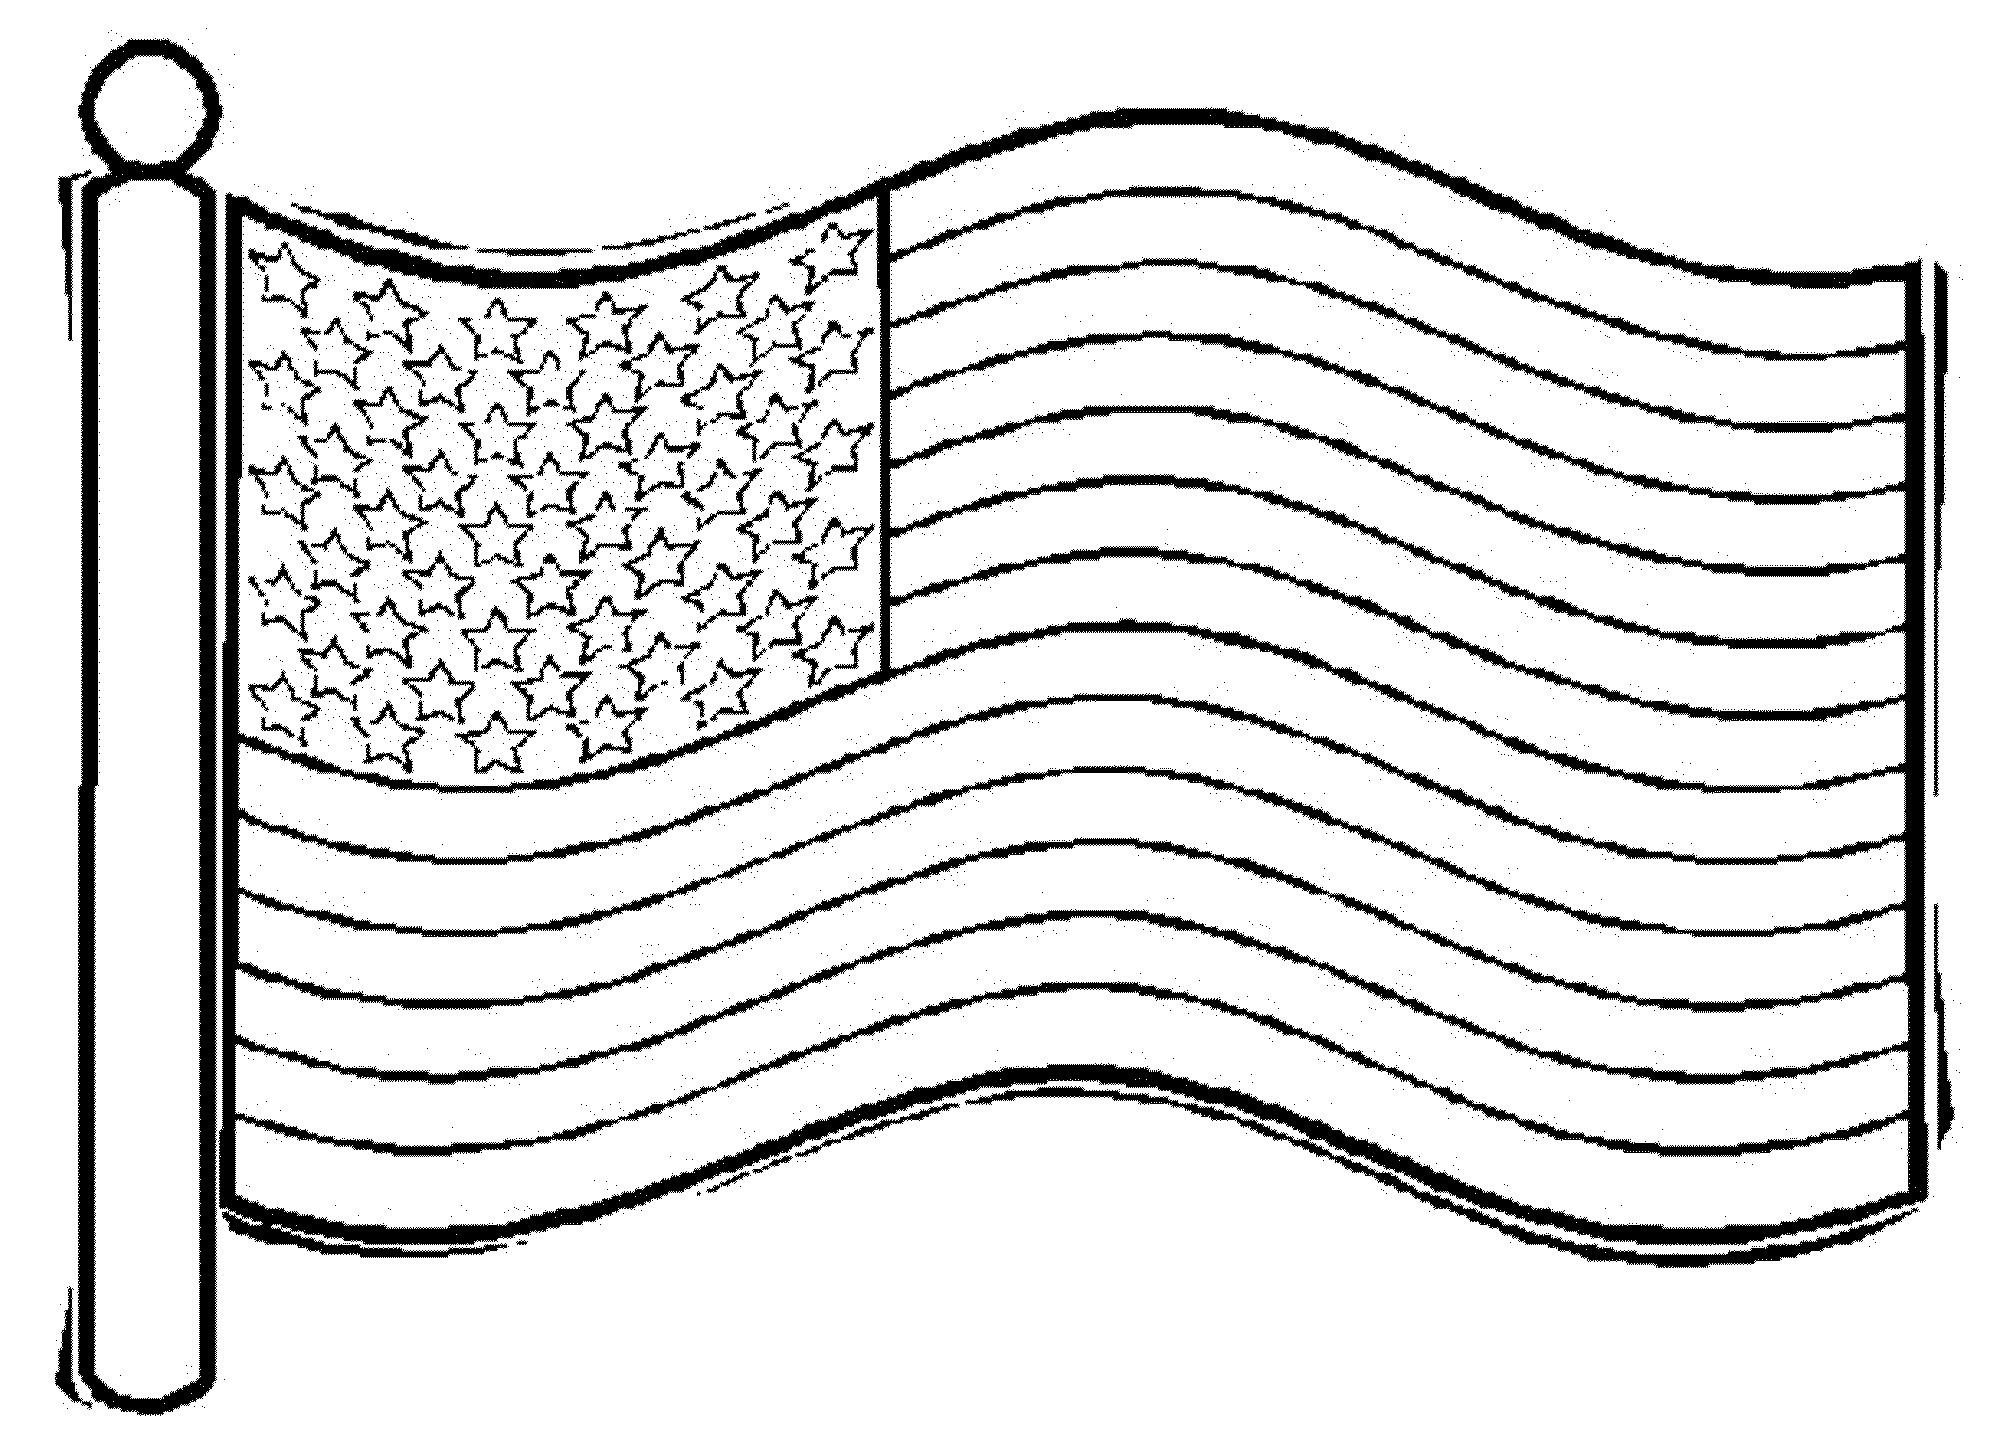 The American Flag Coloring Page Original American Flag Coloring Page Coloring Home For American Flag